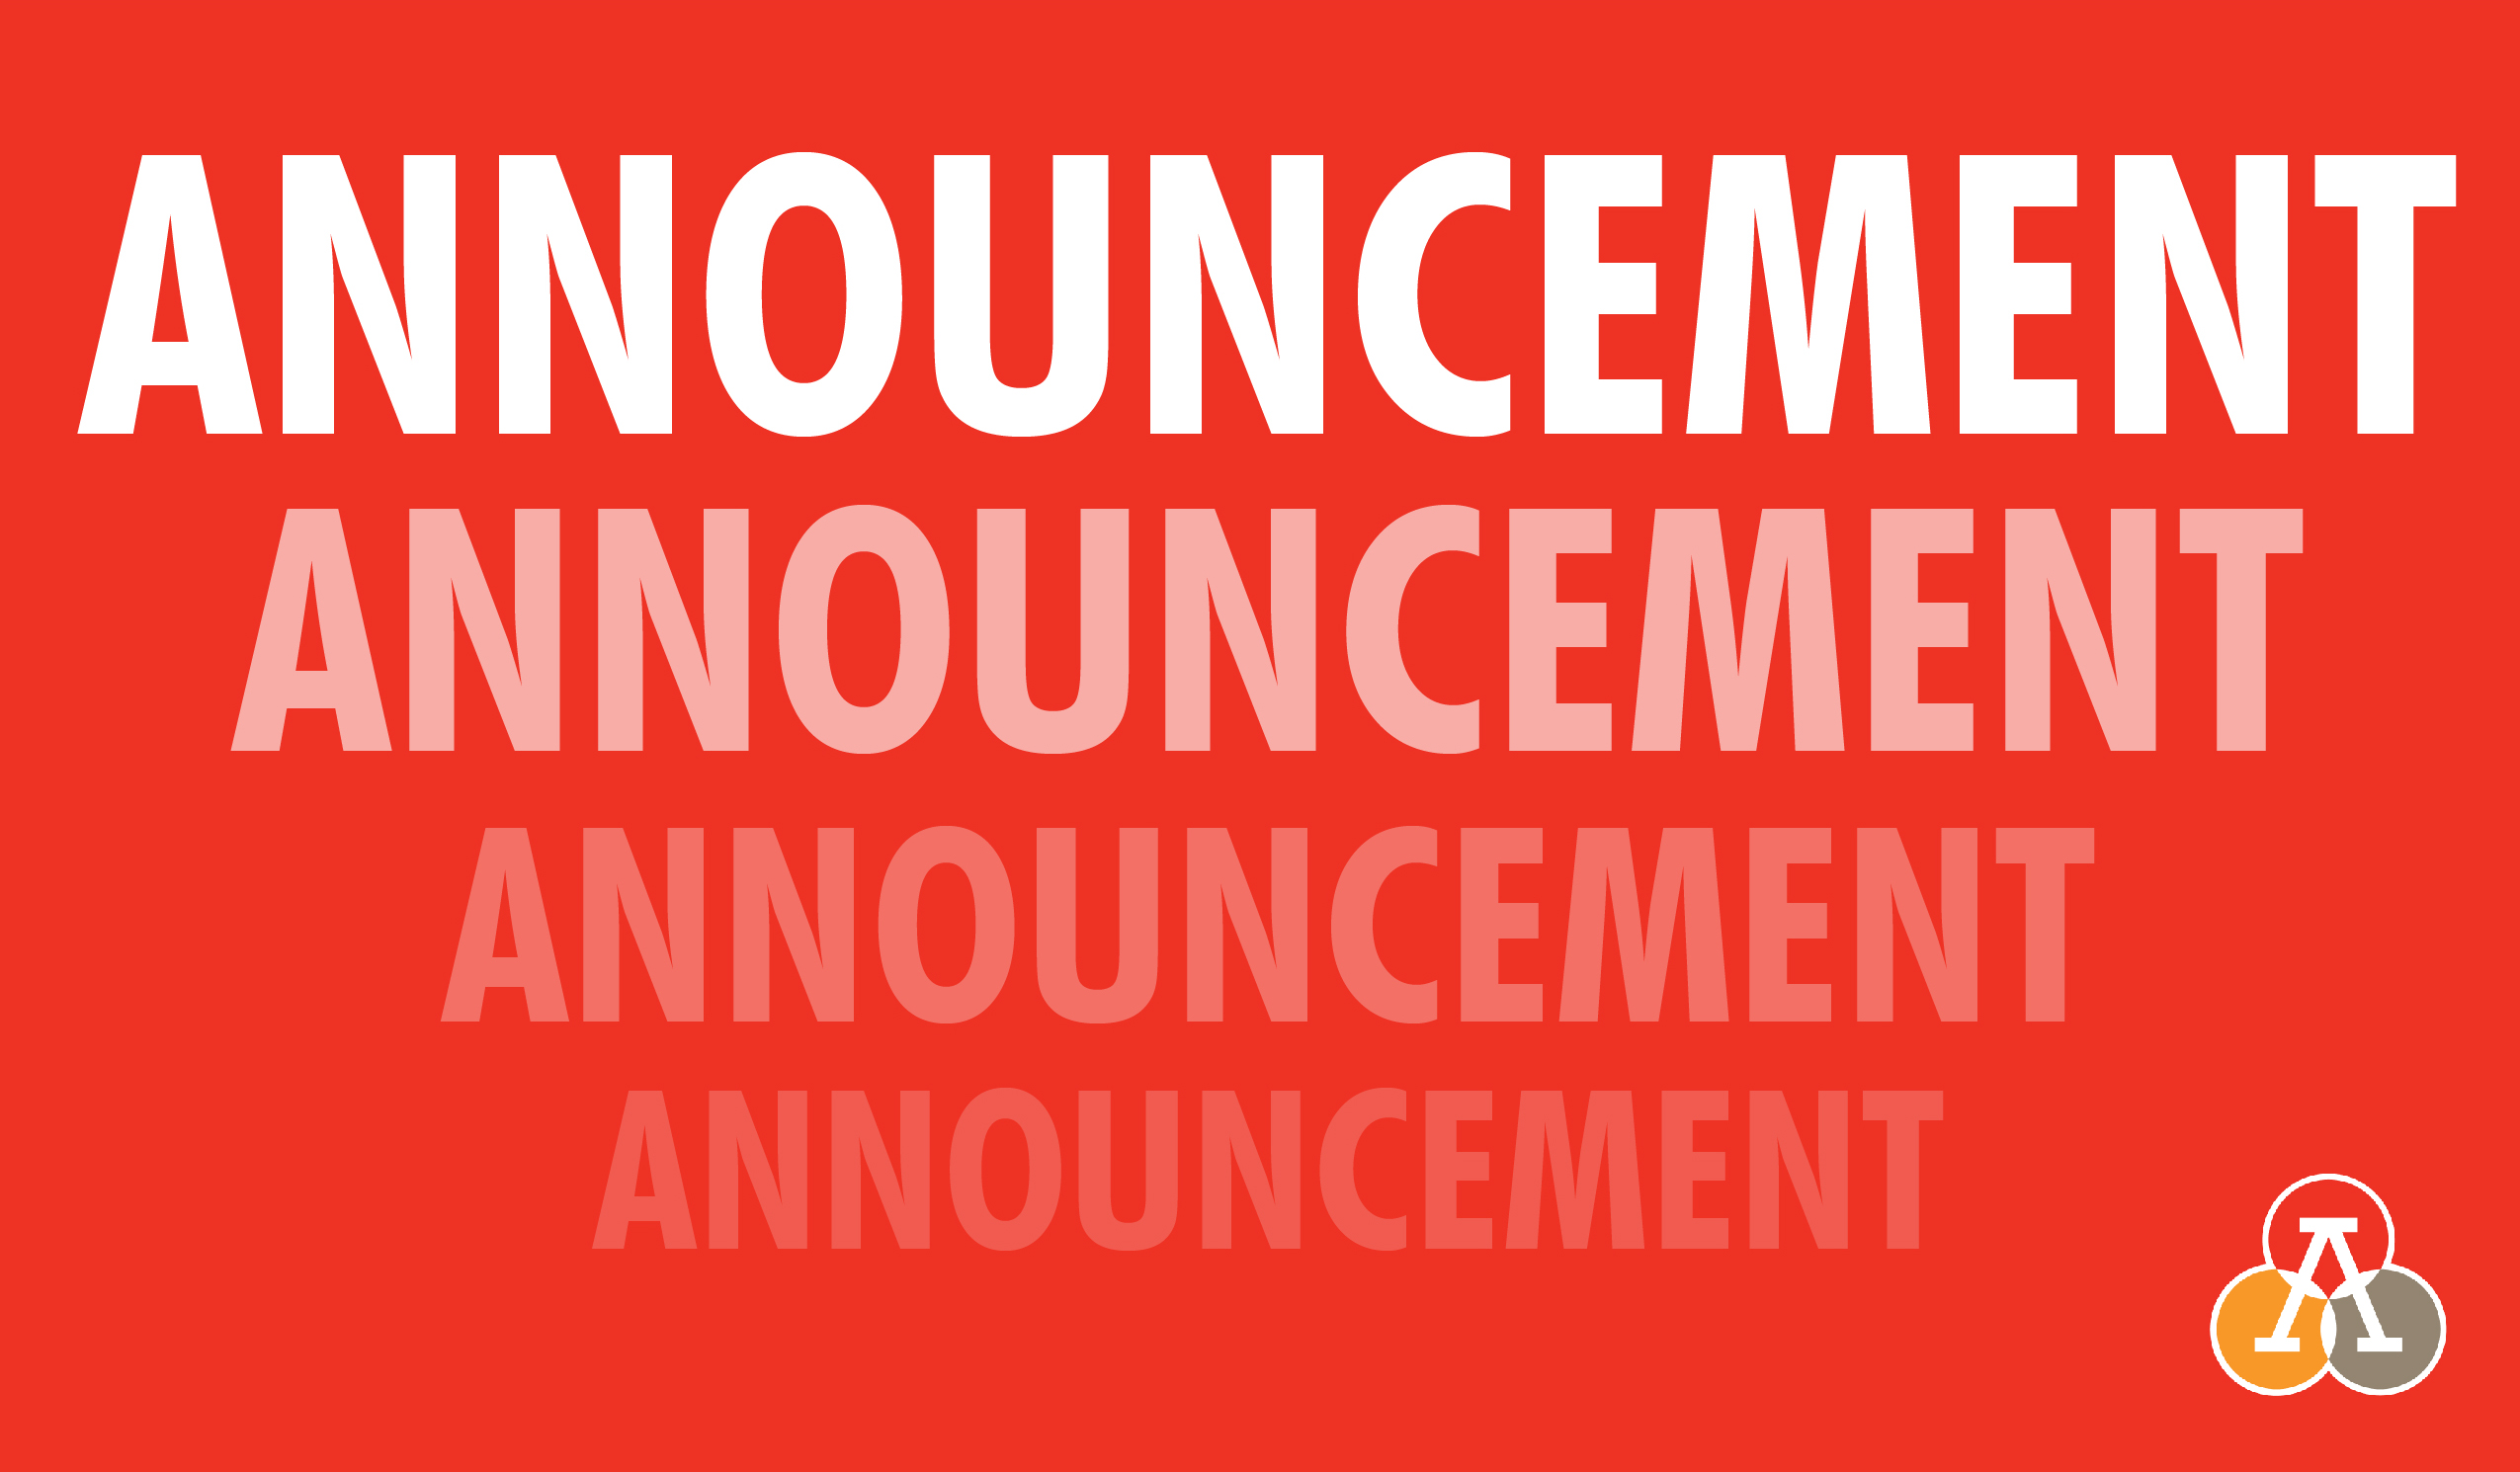 Graphic of announcement